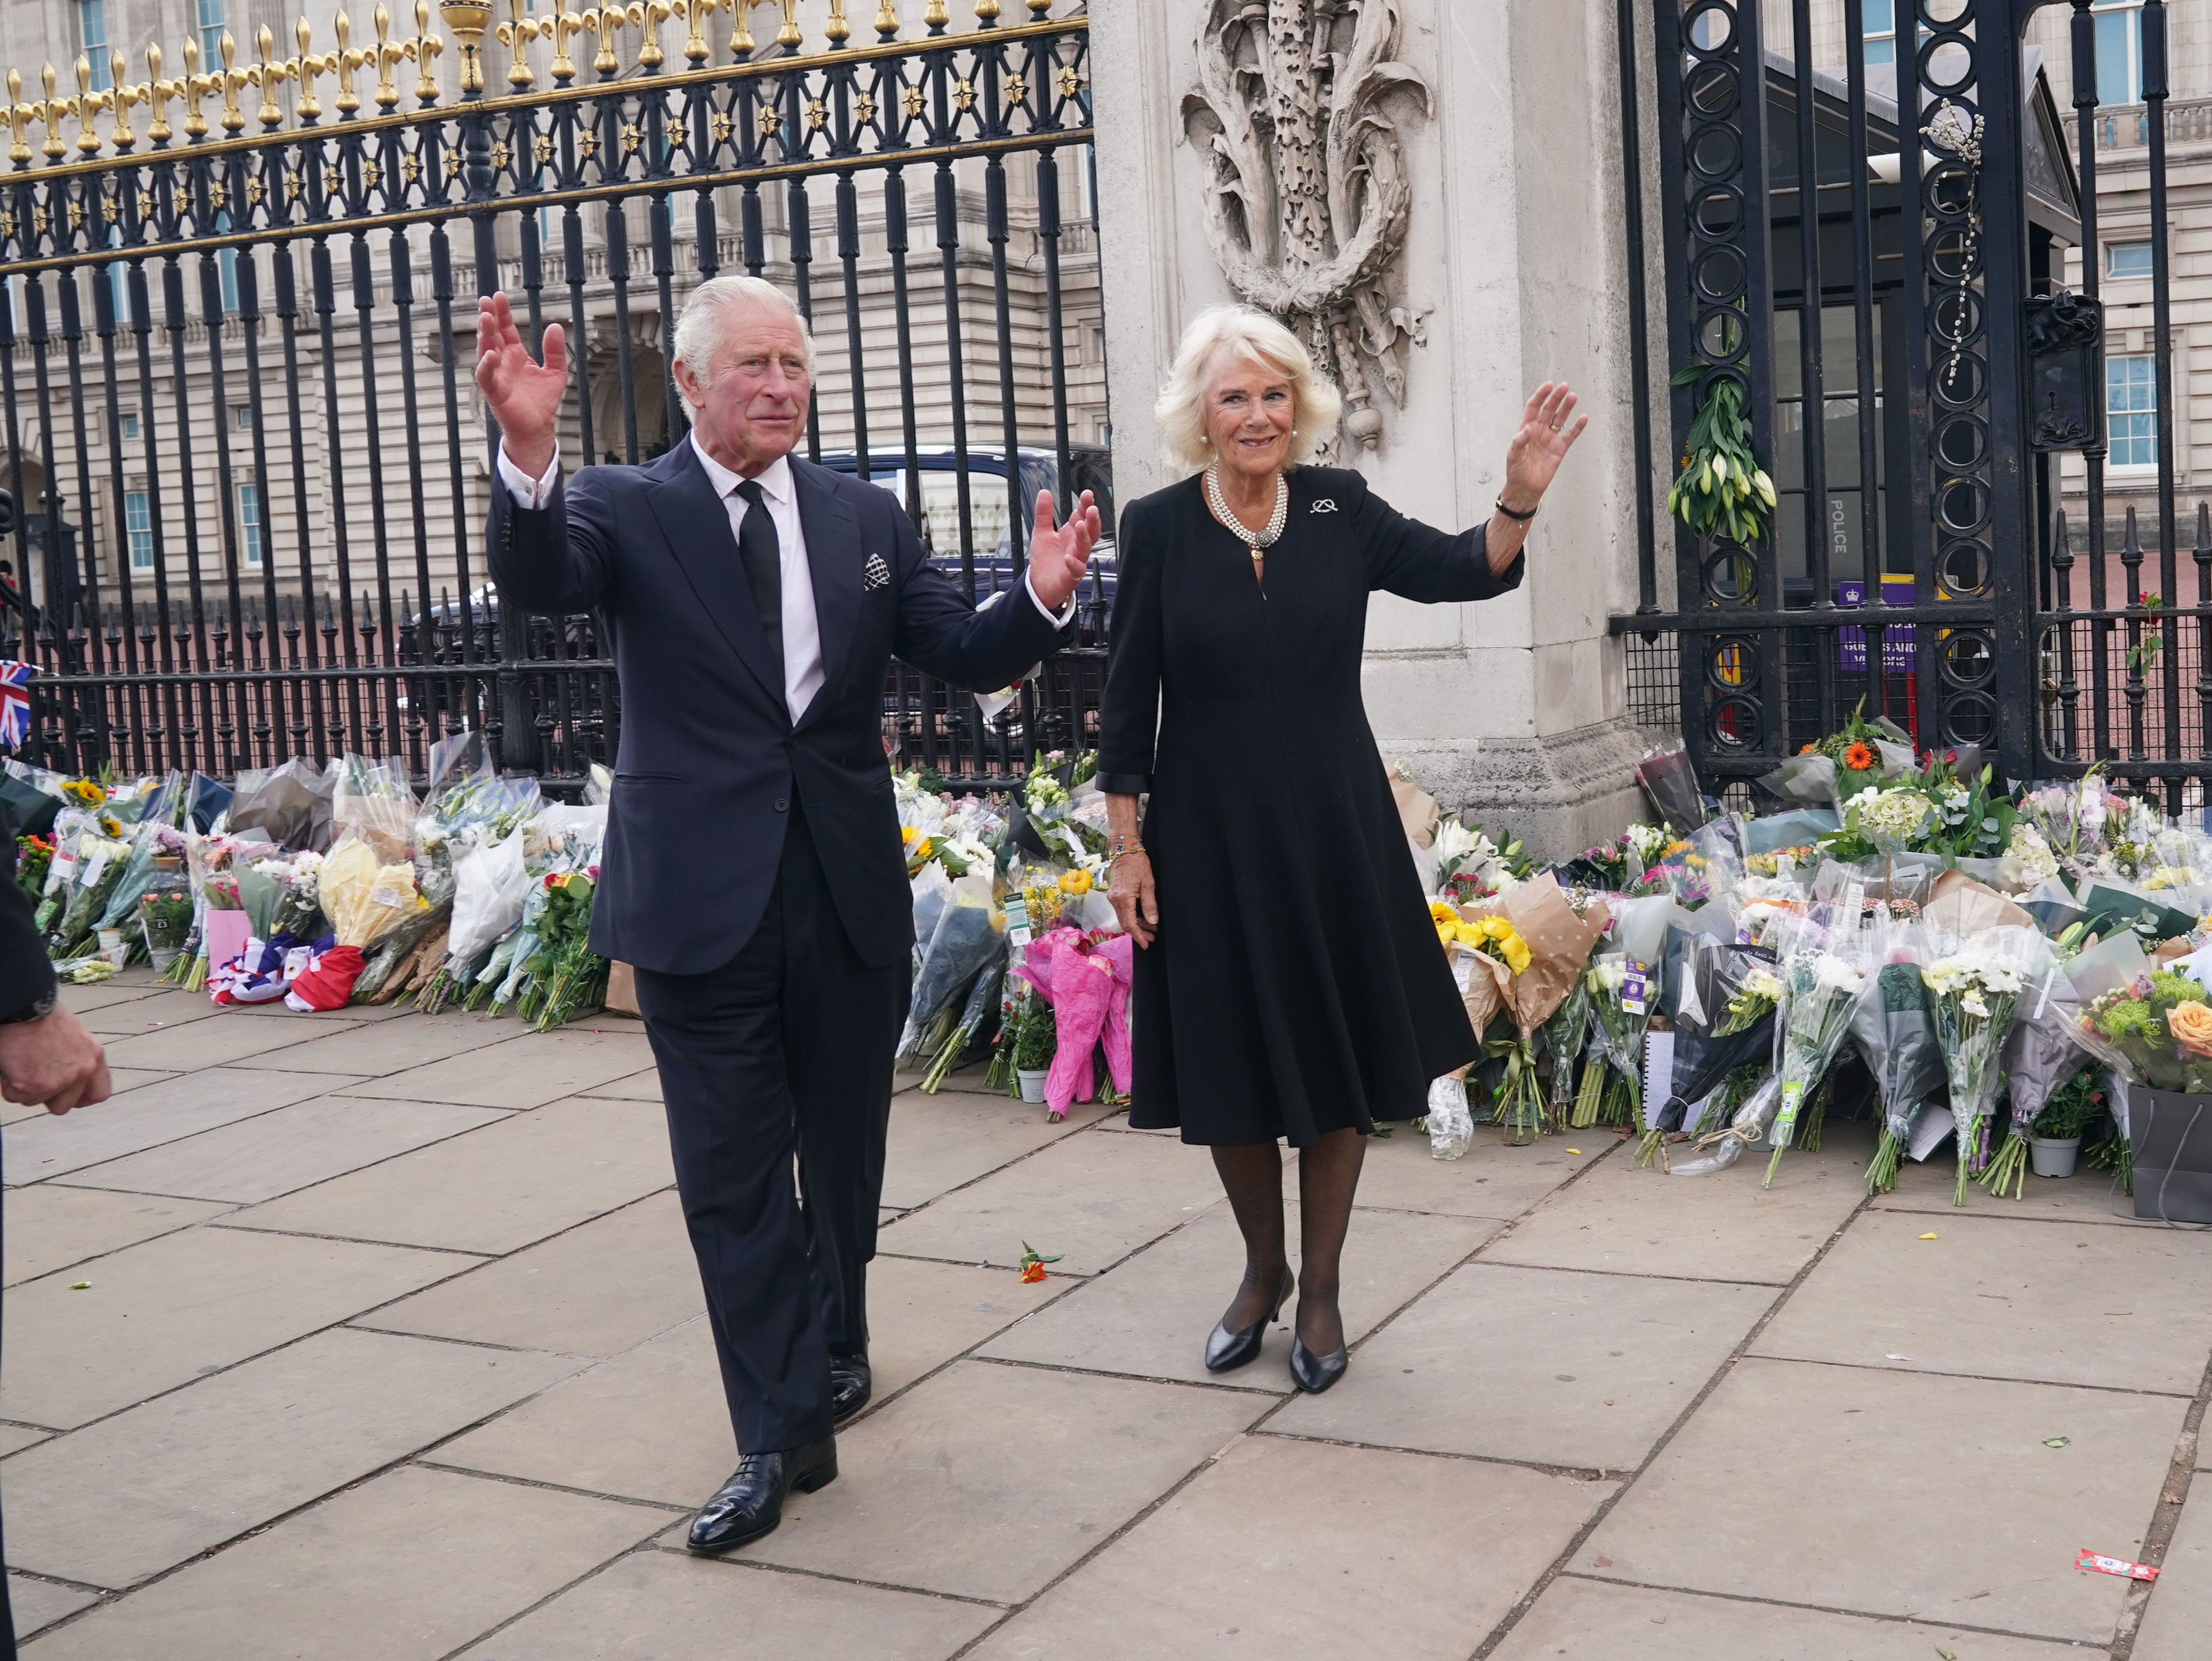 <p>King Charles III and wife Camilla, Queen Consort waved to mourners as they took in the tributes left for his mother, Queen Elizabeth II, outside Buckingham Palace in London on Sept. 9, 2022, the morning after <a href="https://www.wonderwall.com/celebrity/celebrities-dignitaries-react-to-death-of-queen-elizabeth-ii-647756.gallery">the monarch's death in Scotland</a>.</p>